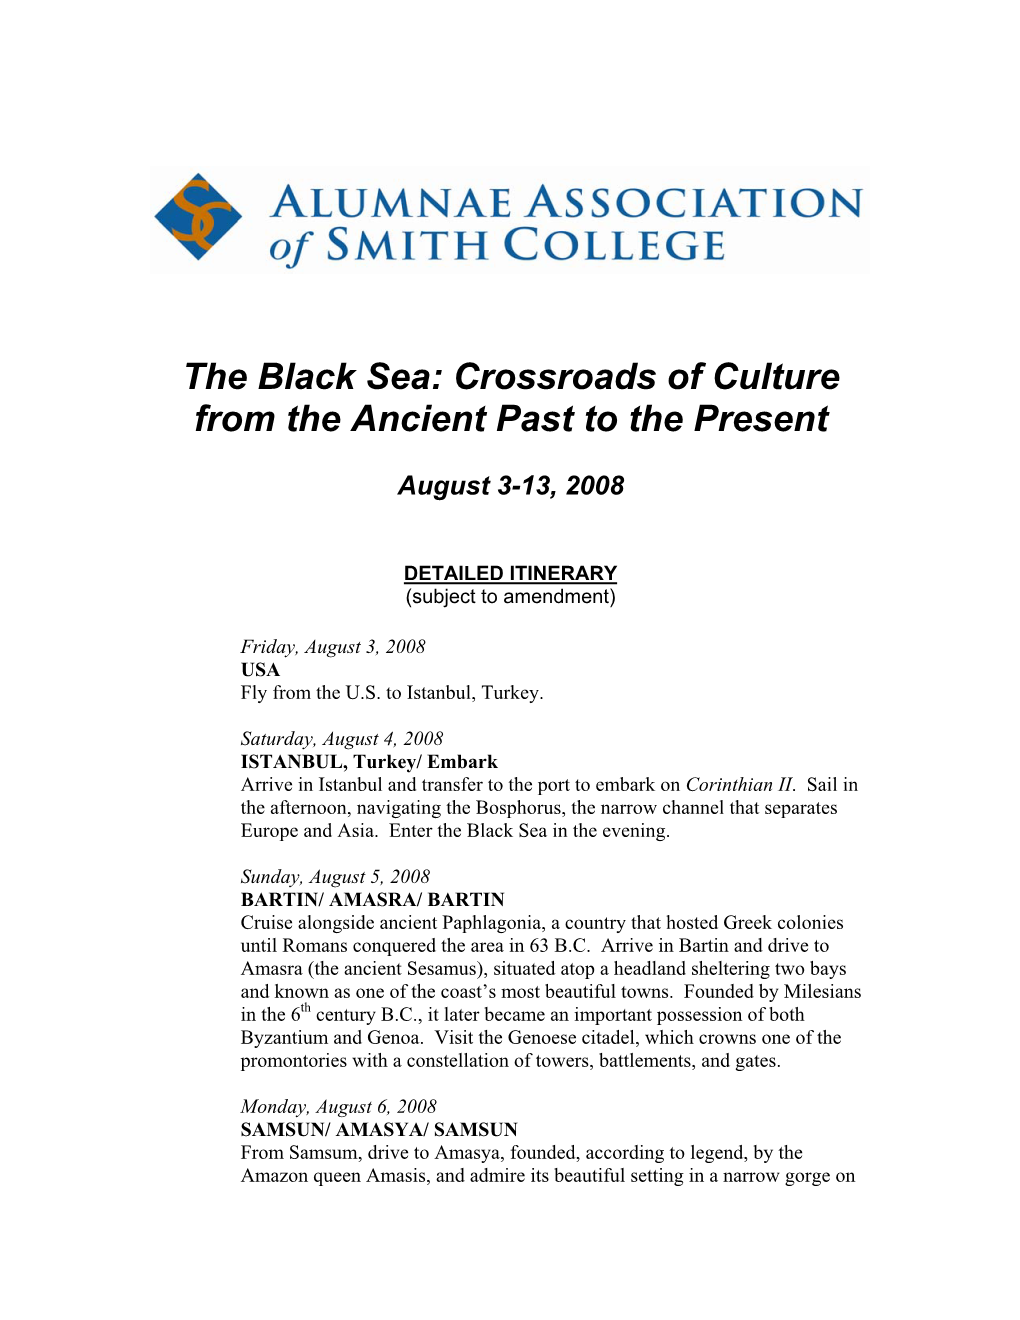 The Black Sea: Crossroads of Culture from the Ancient Past to the Present